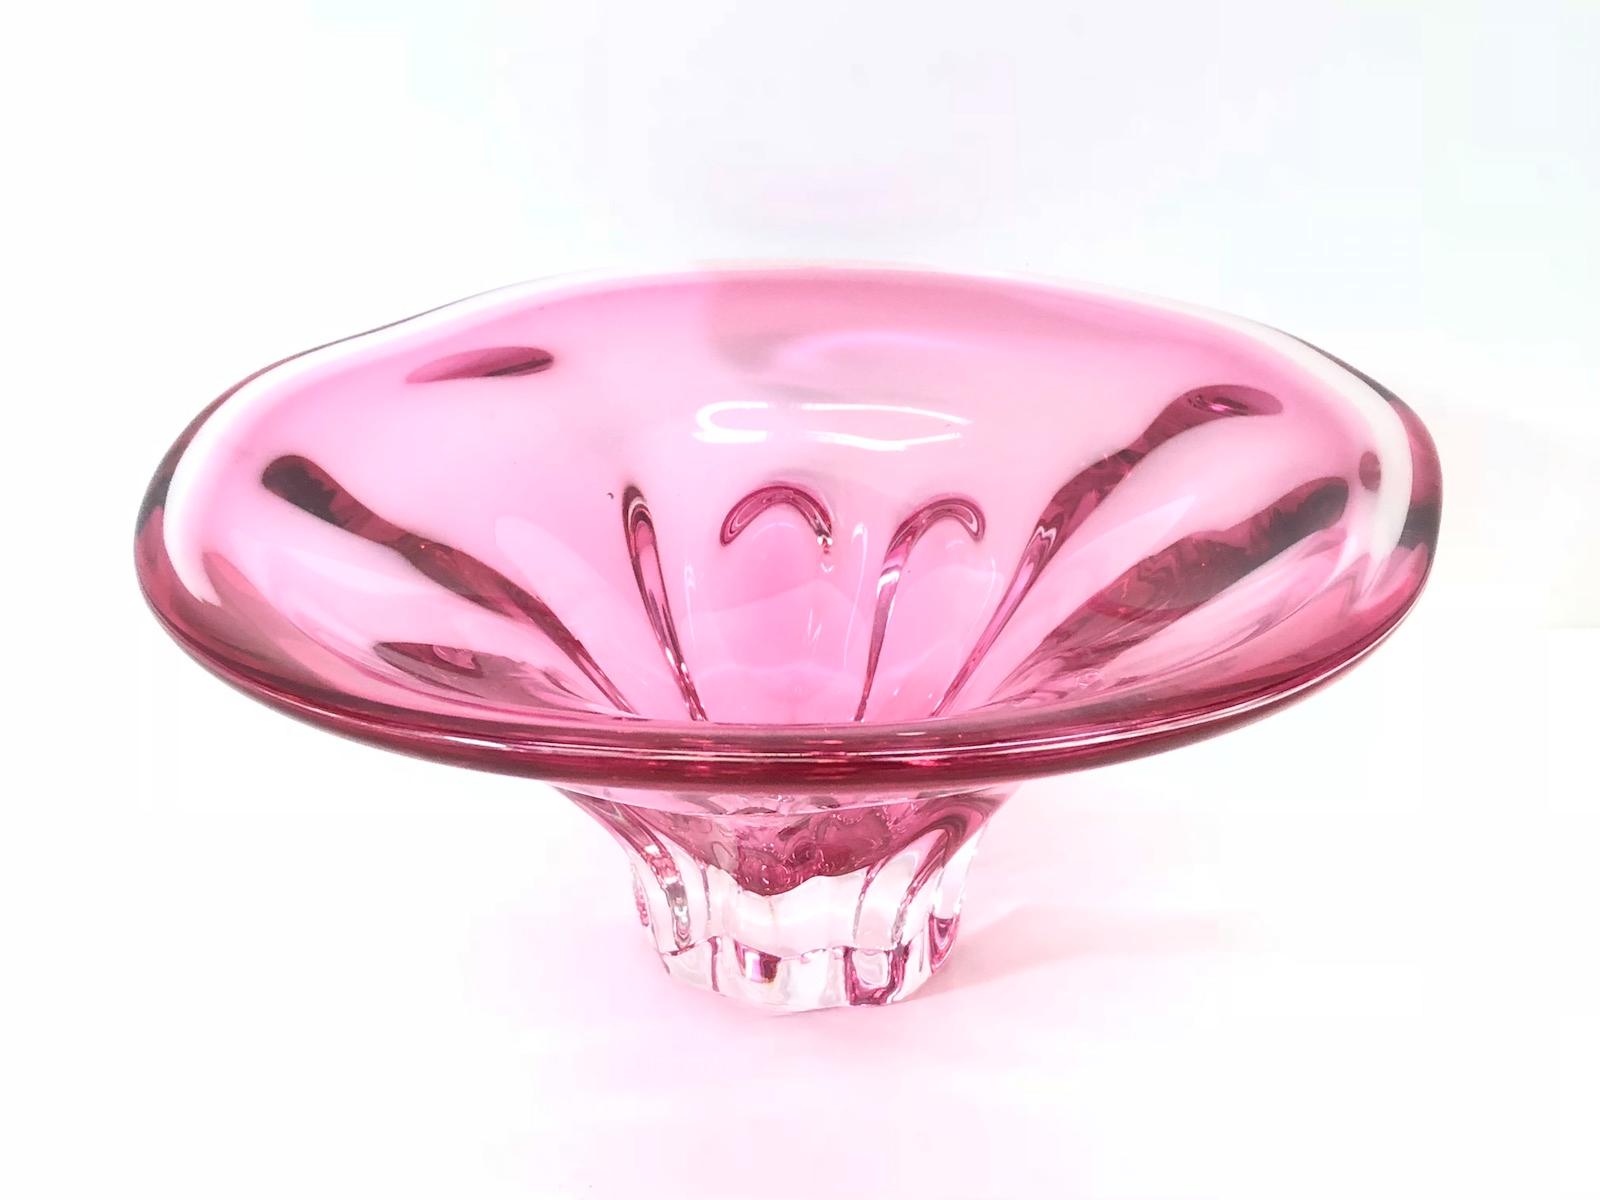 ashtray bowl Glass flower shaped pink heavy glass Murano floraform,Sommerso,cranberry,art glass handblown Italy,floral shape clear